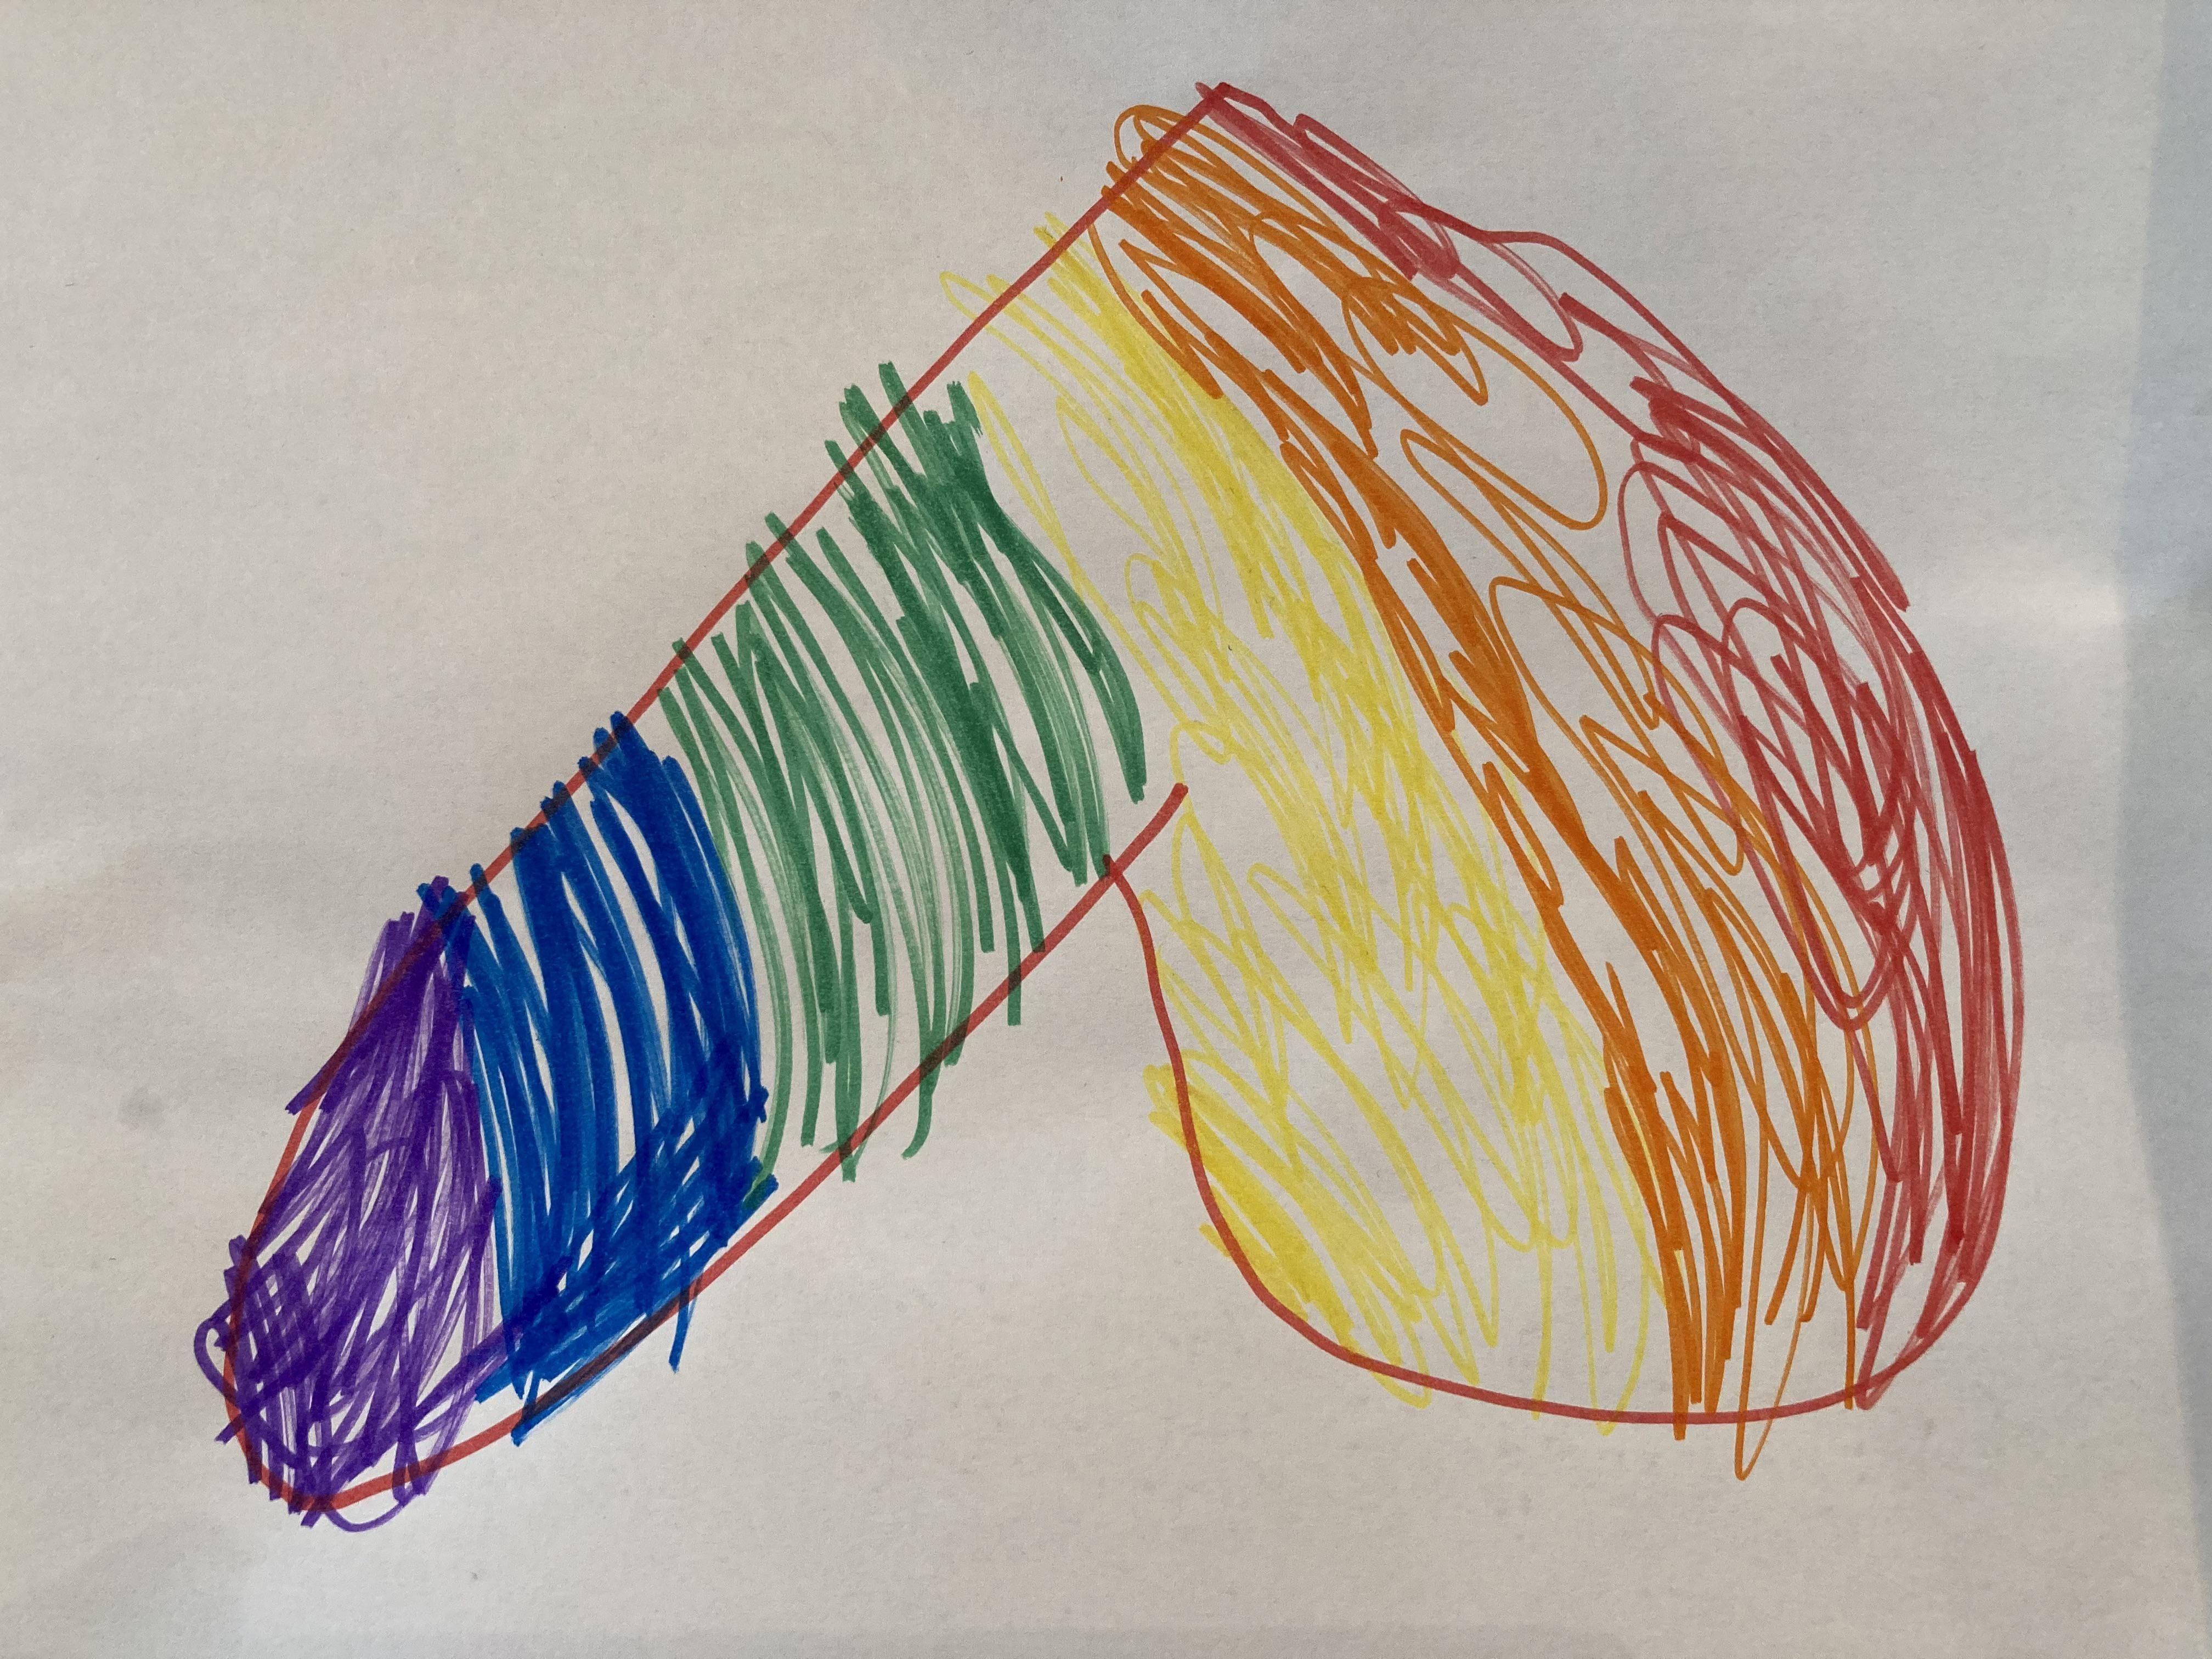 My daughter said she drew me a rainbow heart... then handed me this.